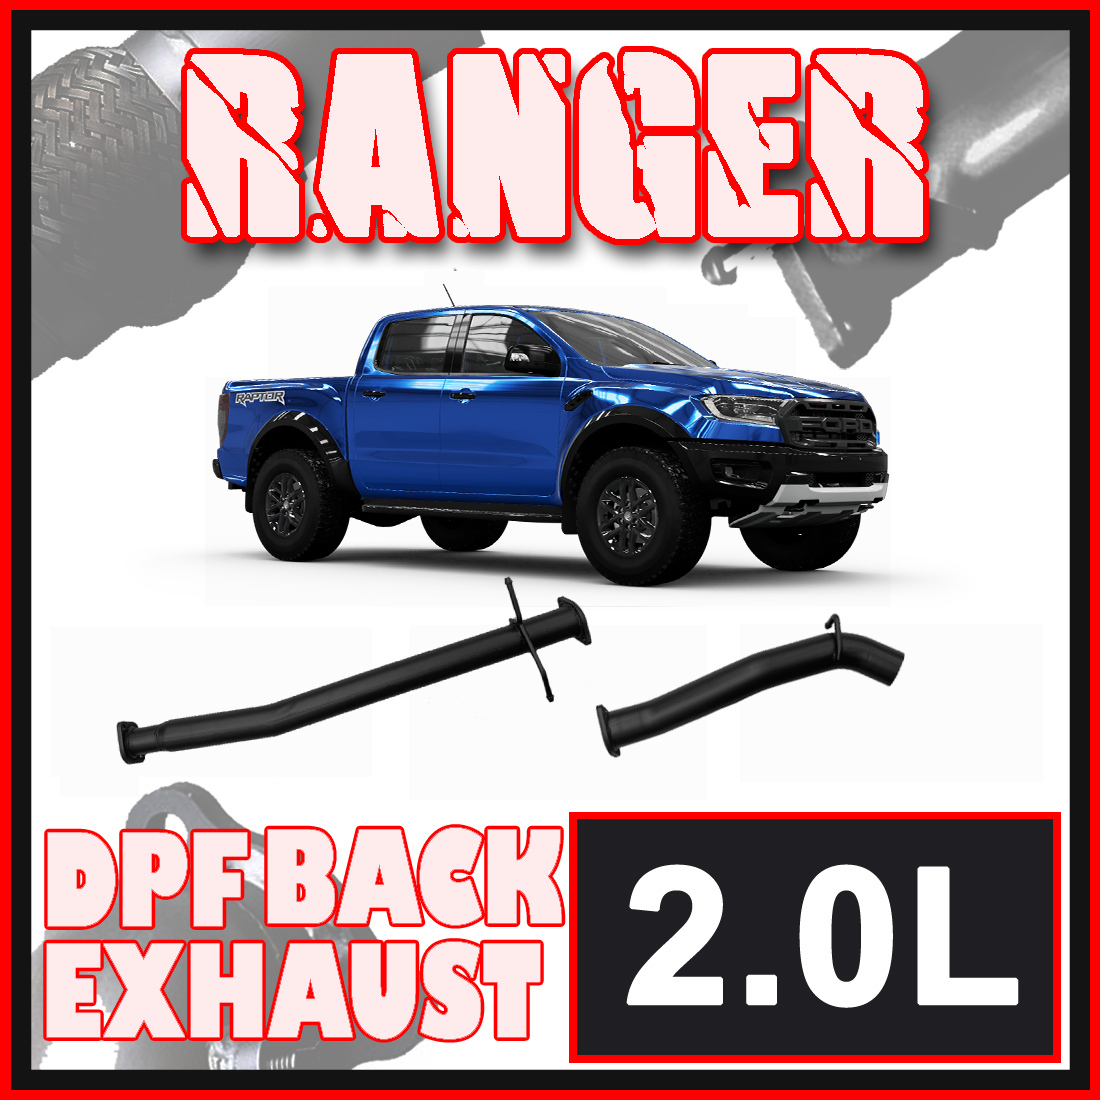 Ford Ranger Exhaust Raptor 2.0L DPF Back Systems image